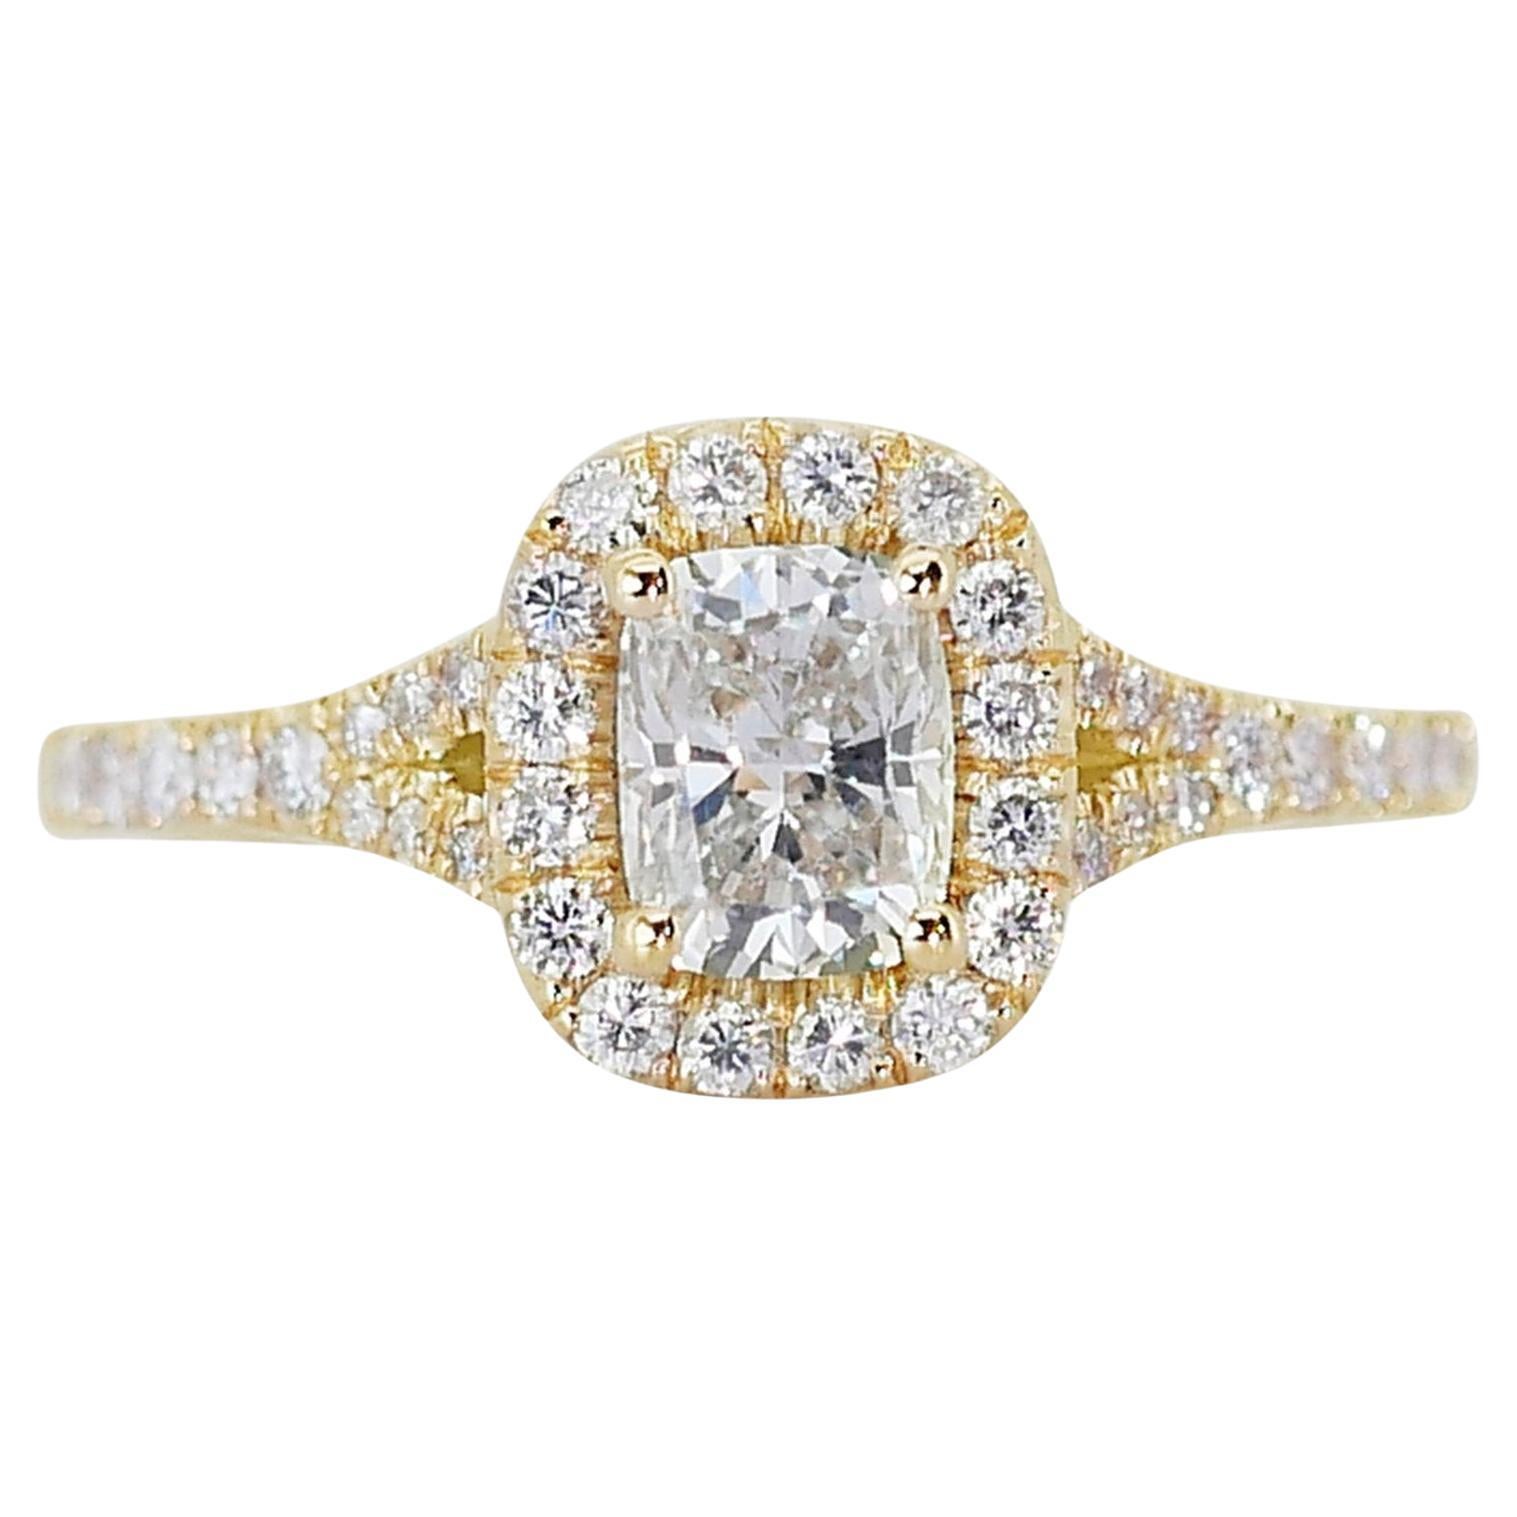 Brilliant 1.33ct Diamond Halo Ring in 18k Yellow Gold – GIA Certified